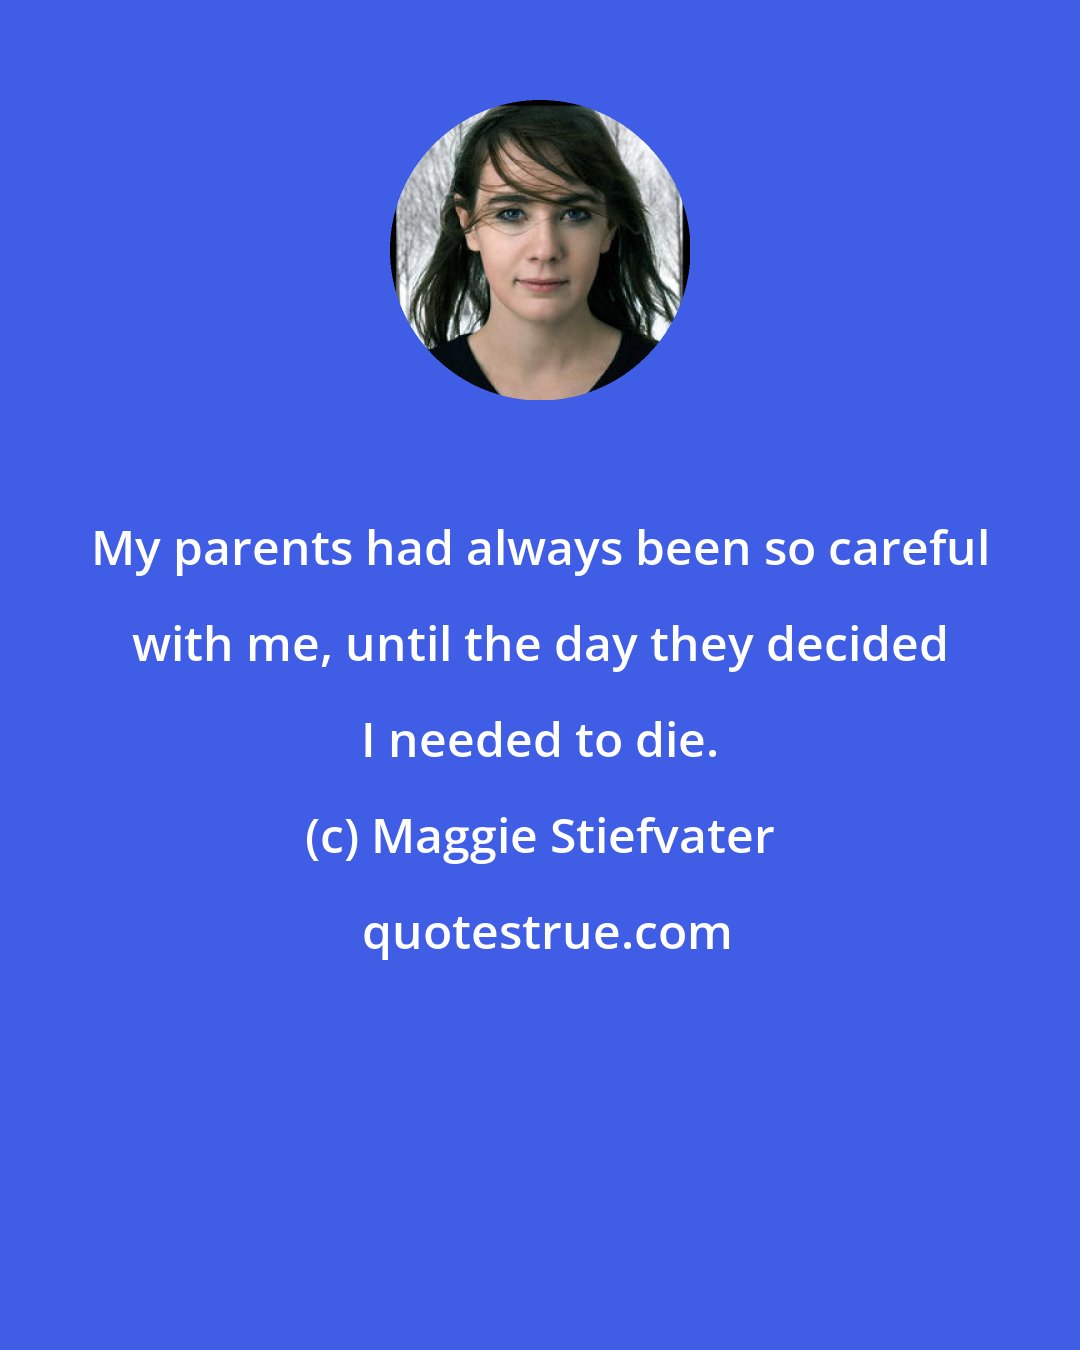 Maggie Stiefvater: My parents had always been so careful with me, until the day they decided I needed to die.